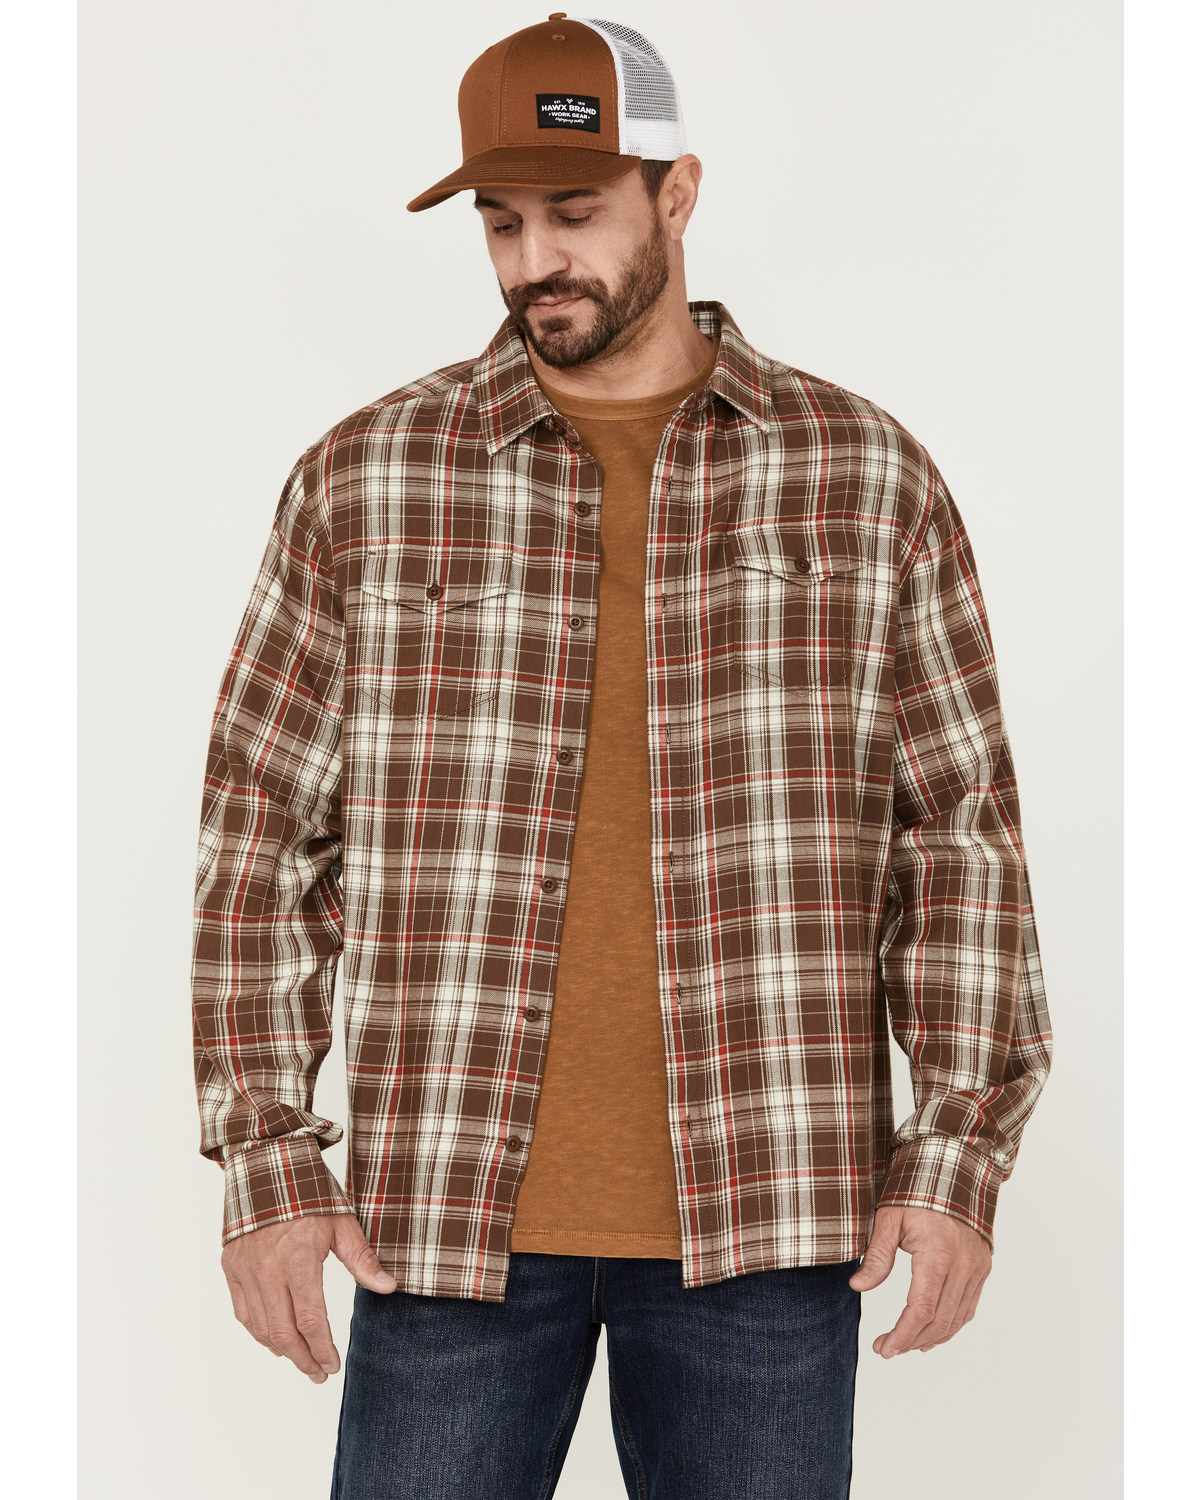 Brothers and Sons Men's Plaid Long Sleeve Button-Down Western Shirt